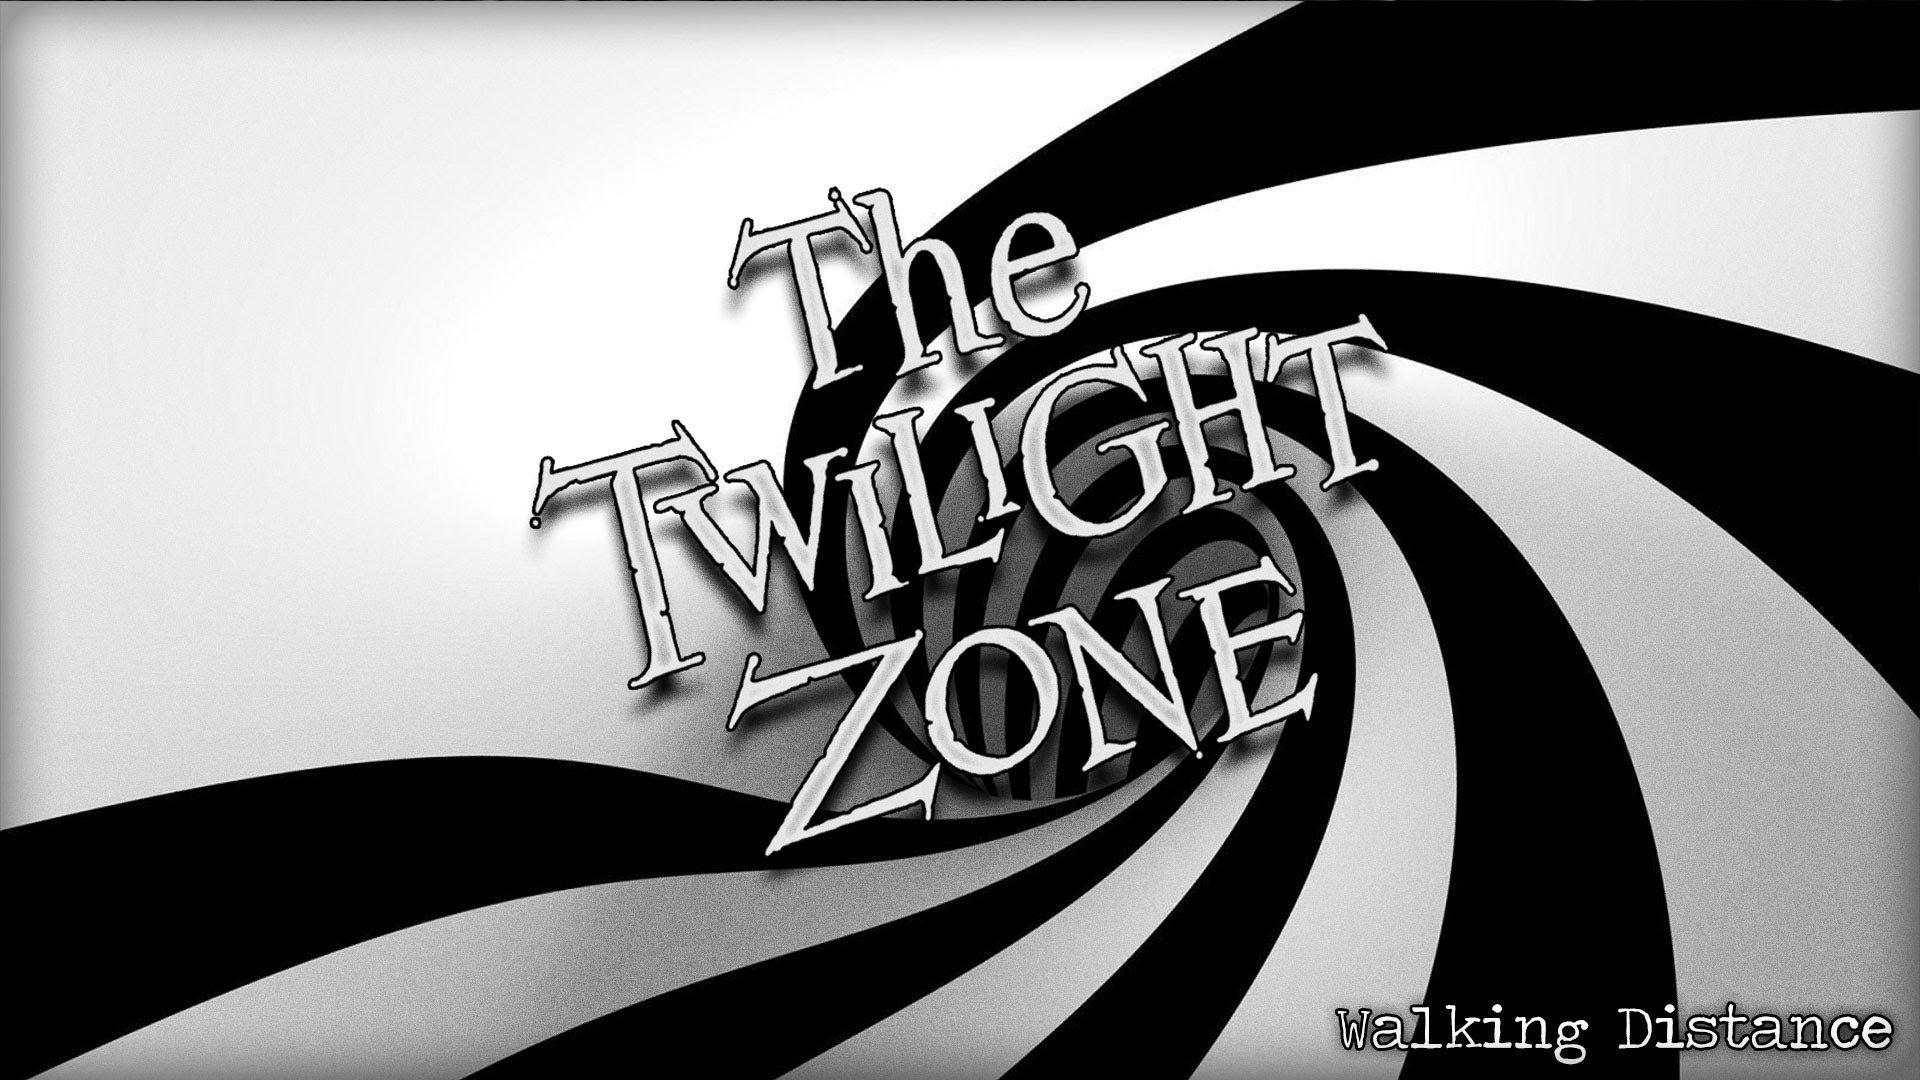 The Twilight Zone Podcast: Walking Distance Serling, Night